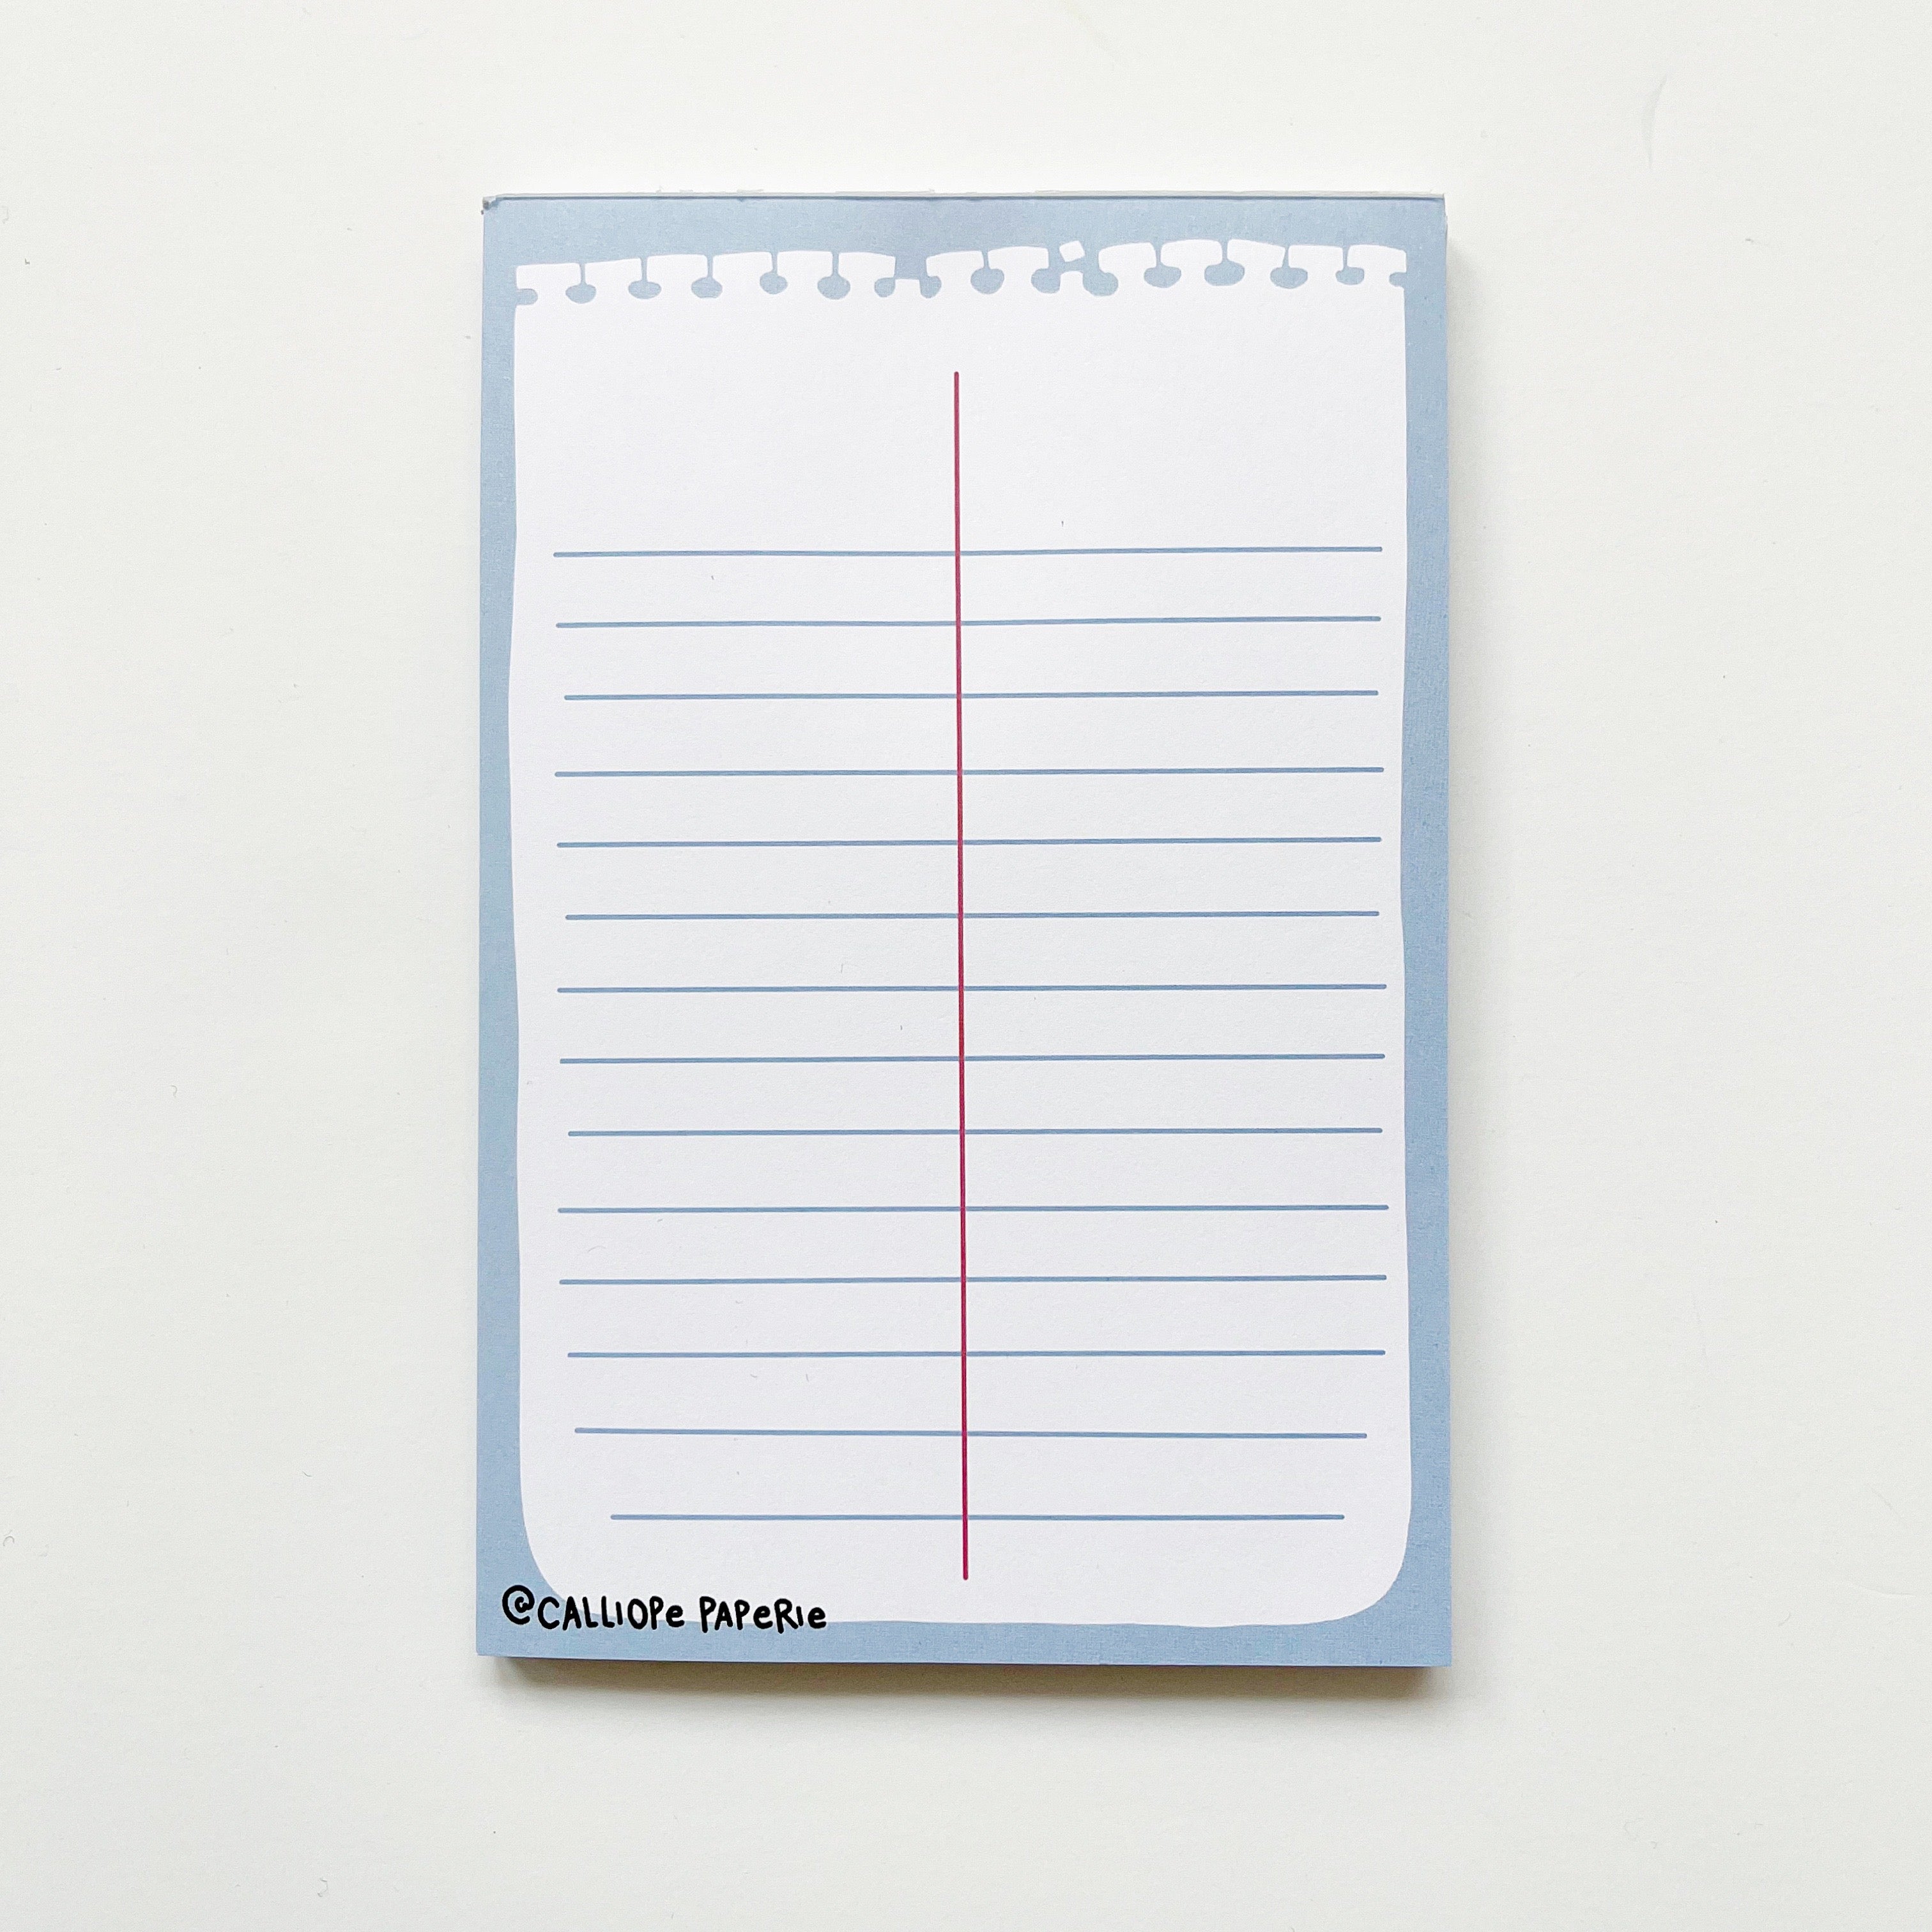 Image of notepad with image of white piece of memo notepad paper with blue lines and a red vertical line down the middle on a blue background. 